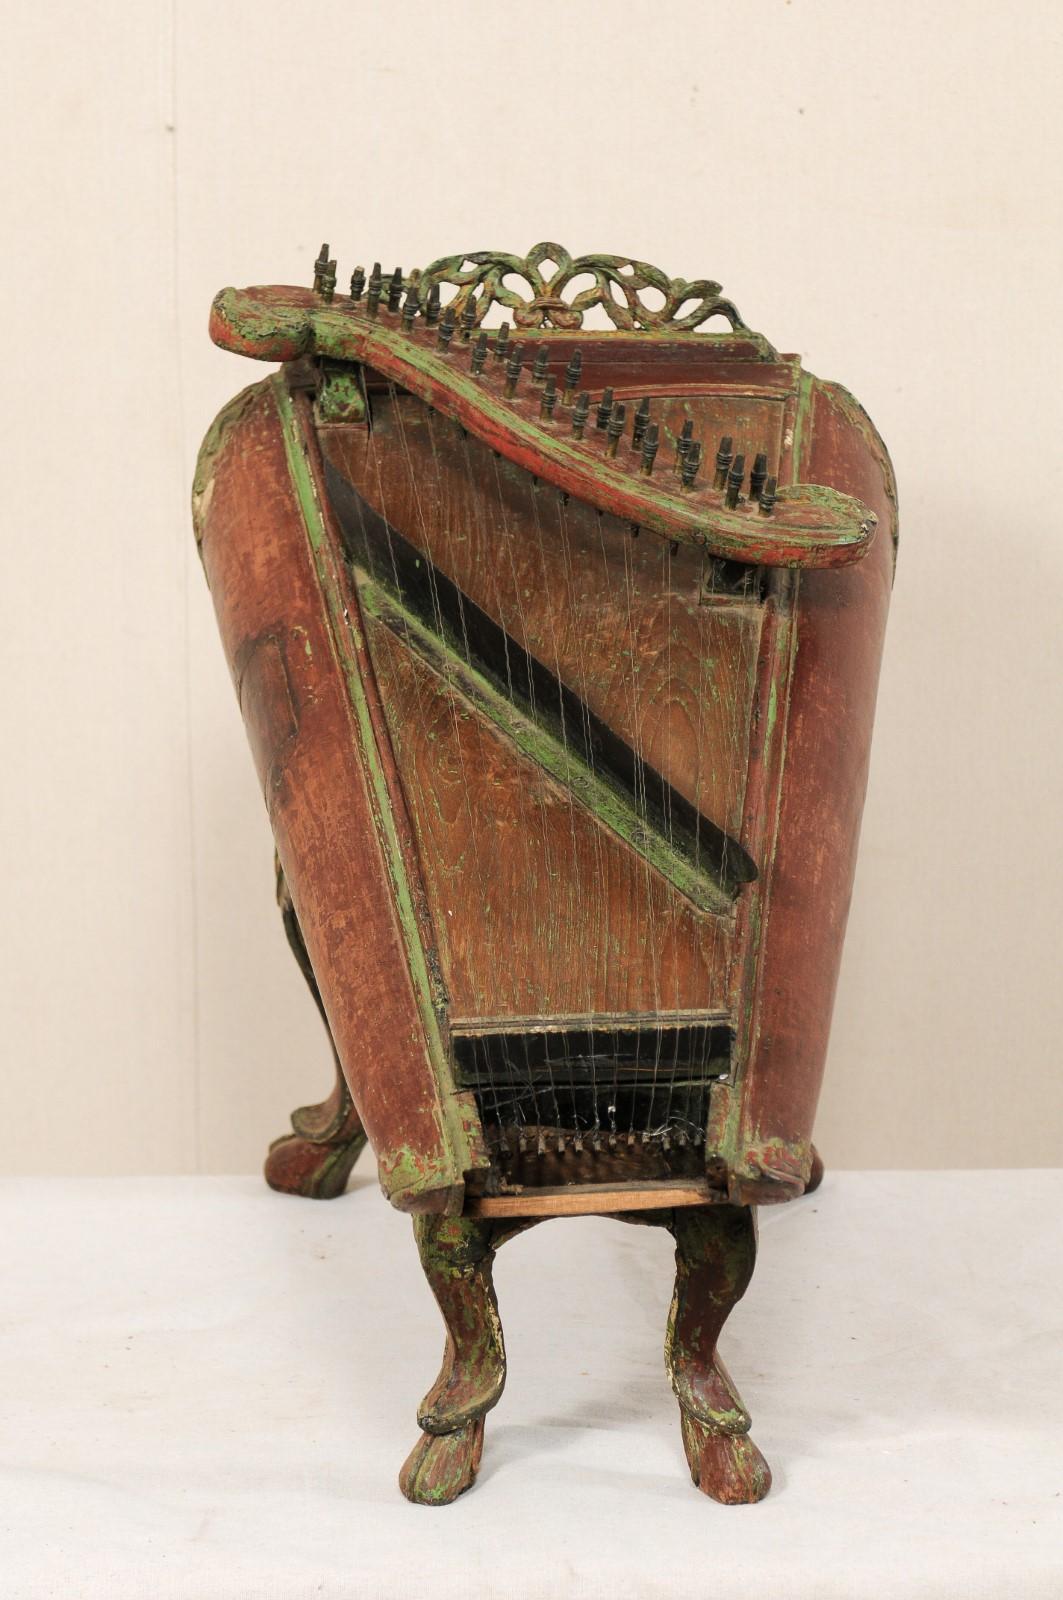 19th Century Celempung Musical Instrument from Java, Indonesia 1